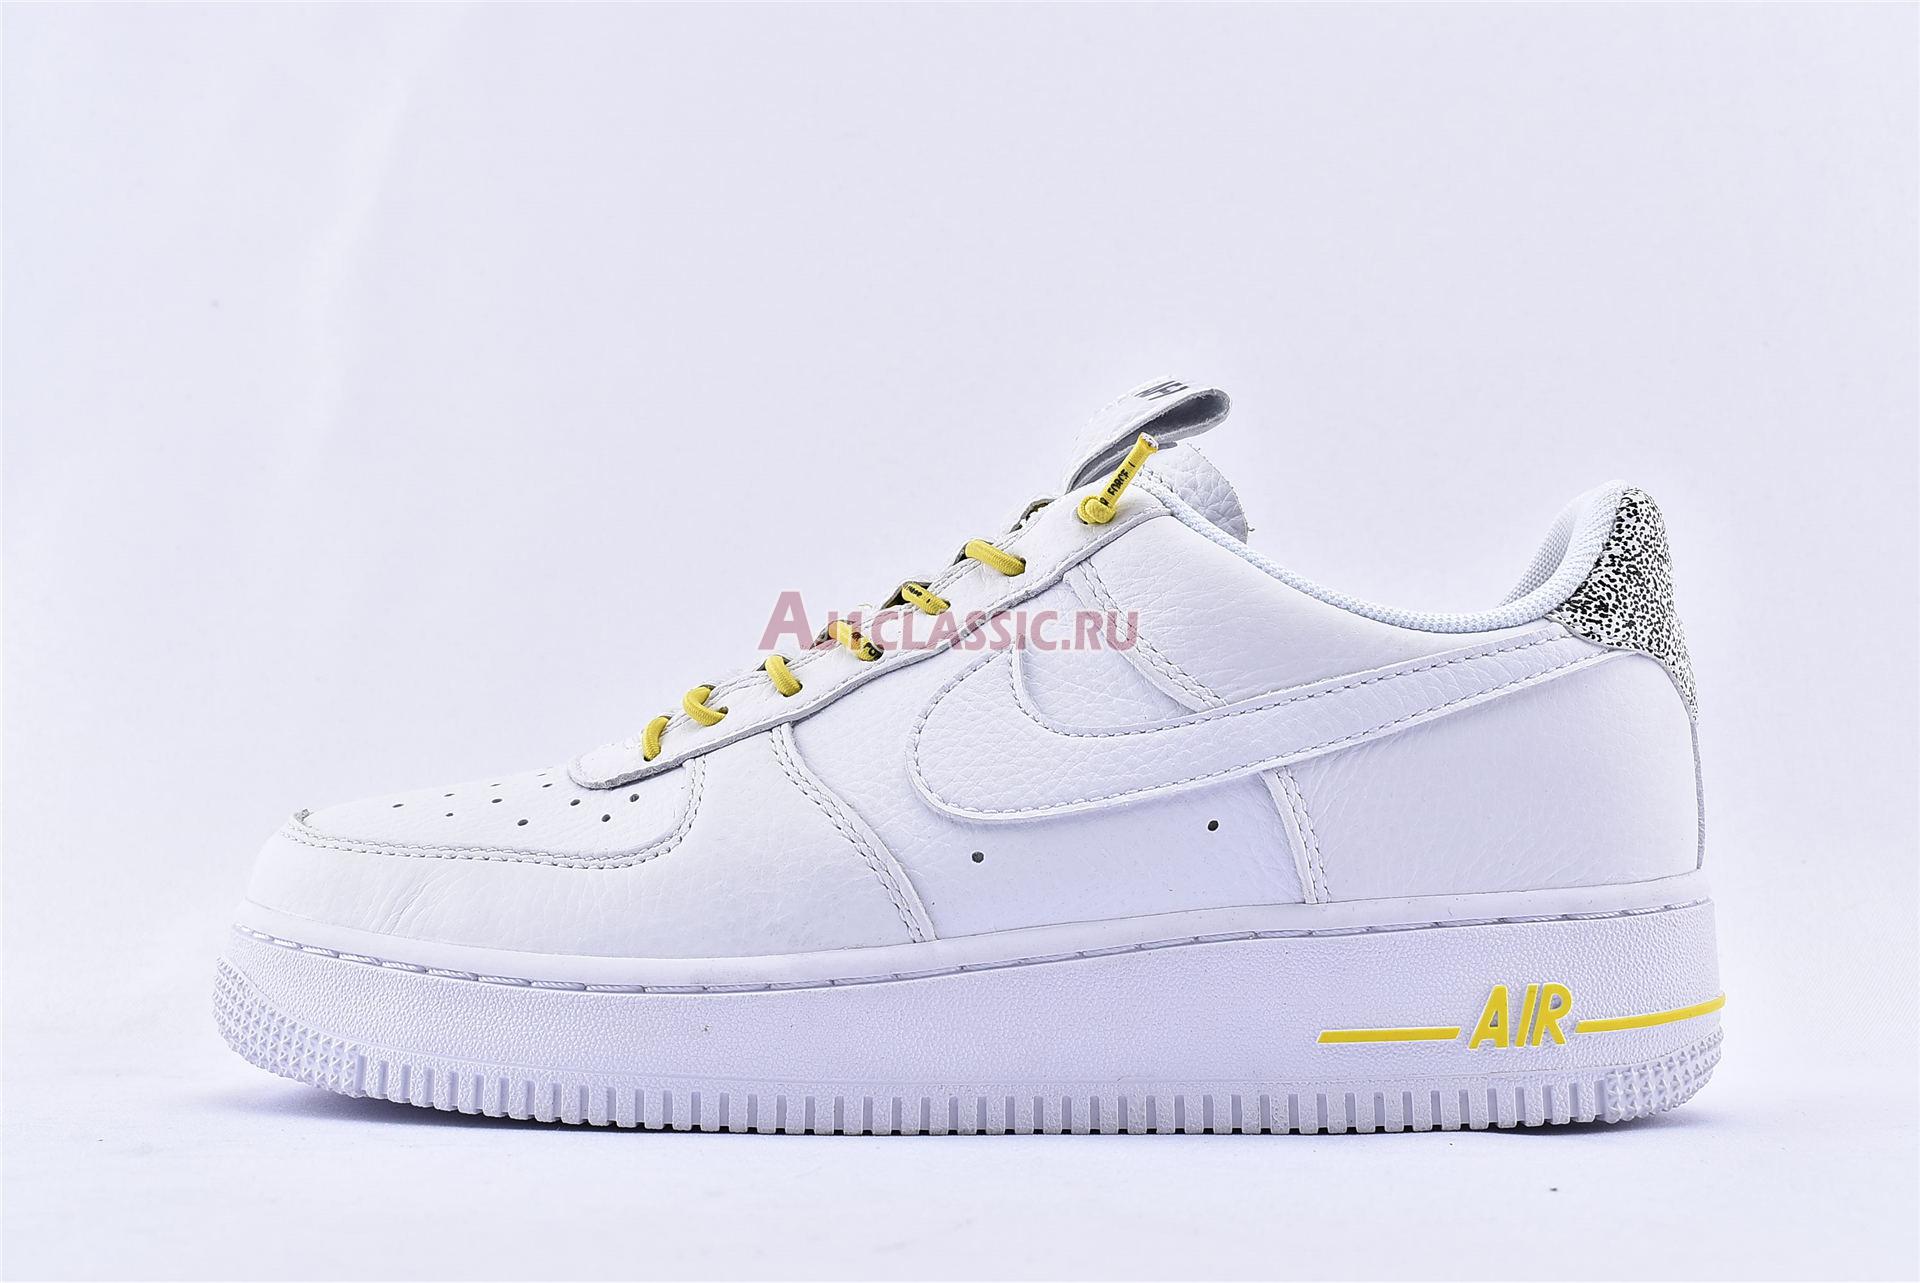 Nike Air Force 1 07 Lux "White Reflective" 898889-104